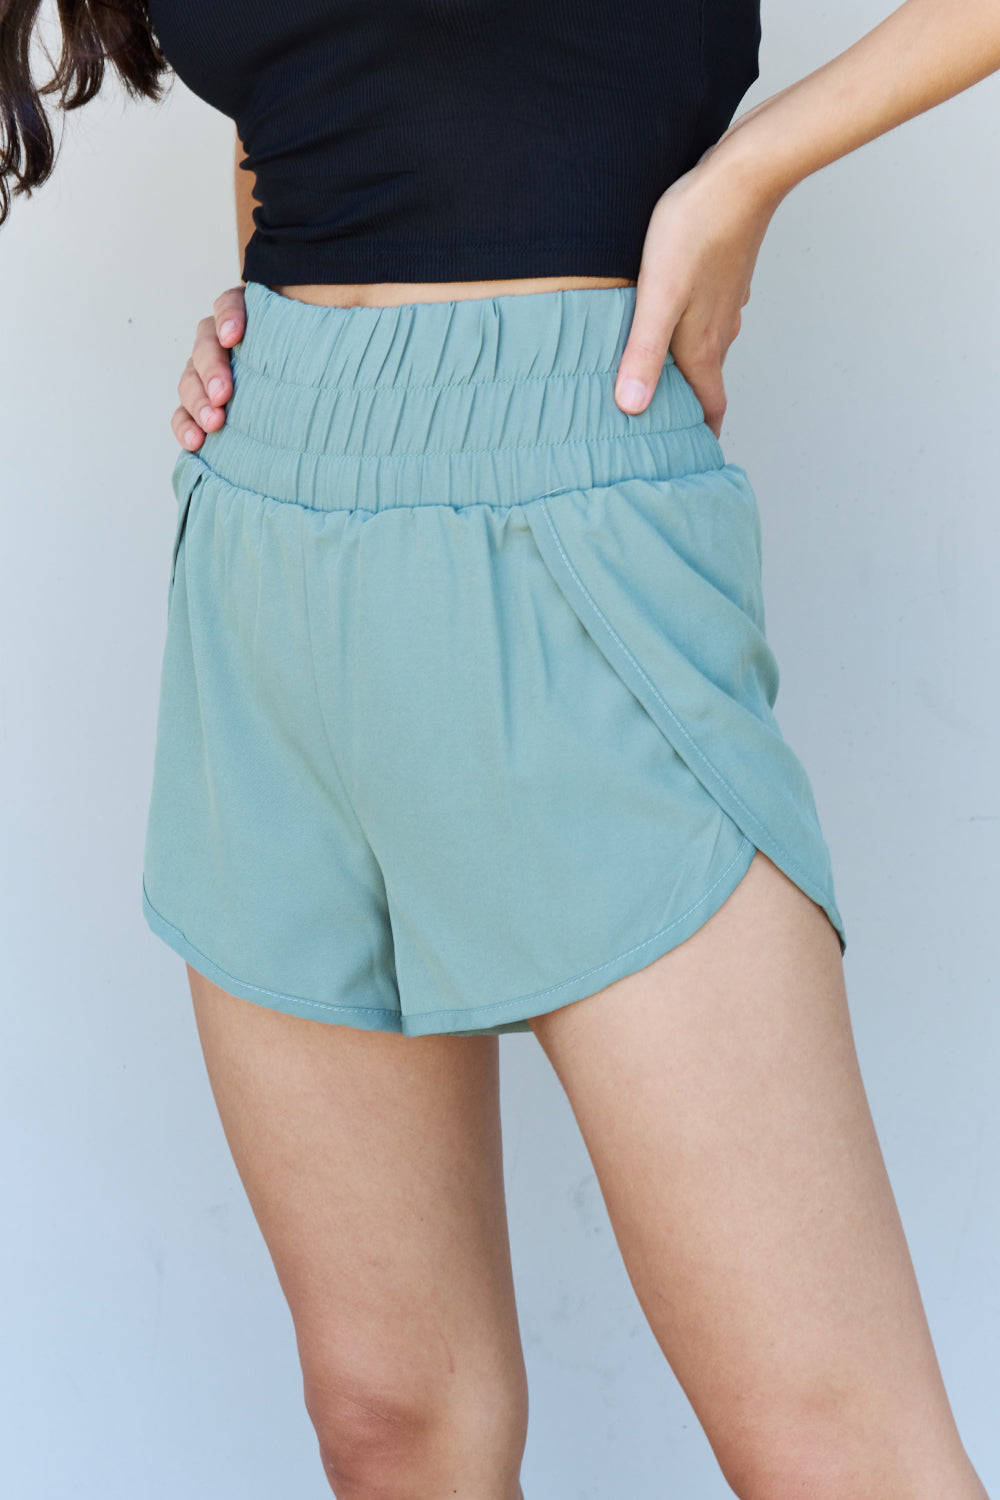 Ninexis Stay Active High Waistband Active Shorts in Pastel Blue - Short Leggings - FITGGINS